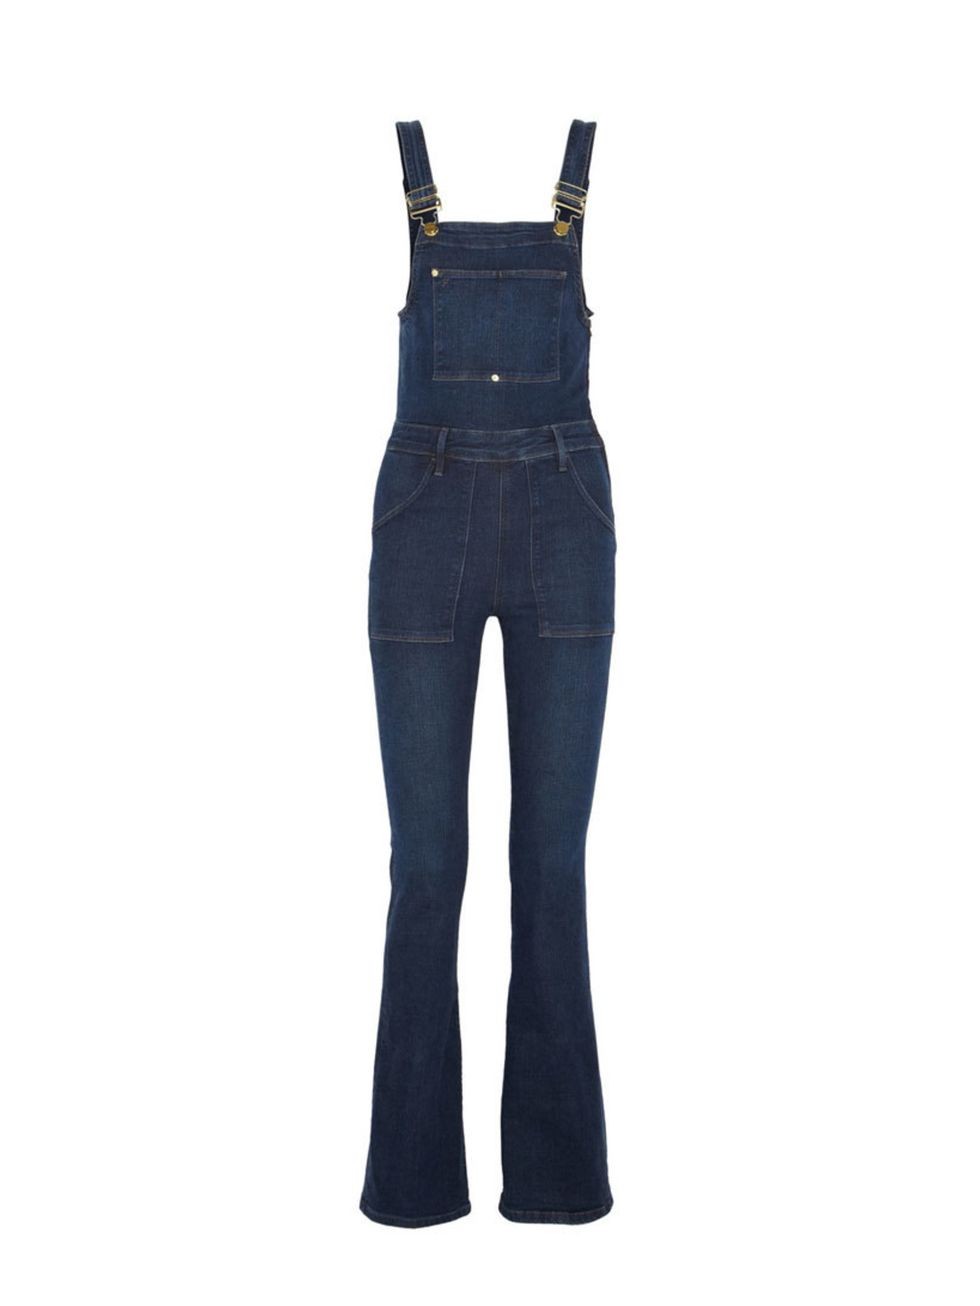 Leave your jeans behind and pack these denim dungarees instead.

Frame &pound;325, Net-a-porter